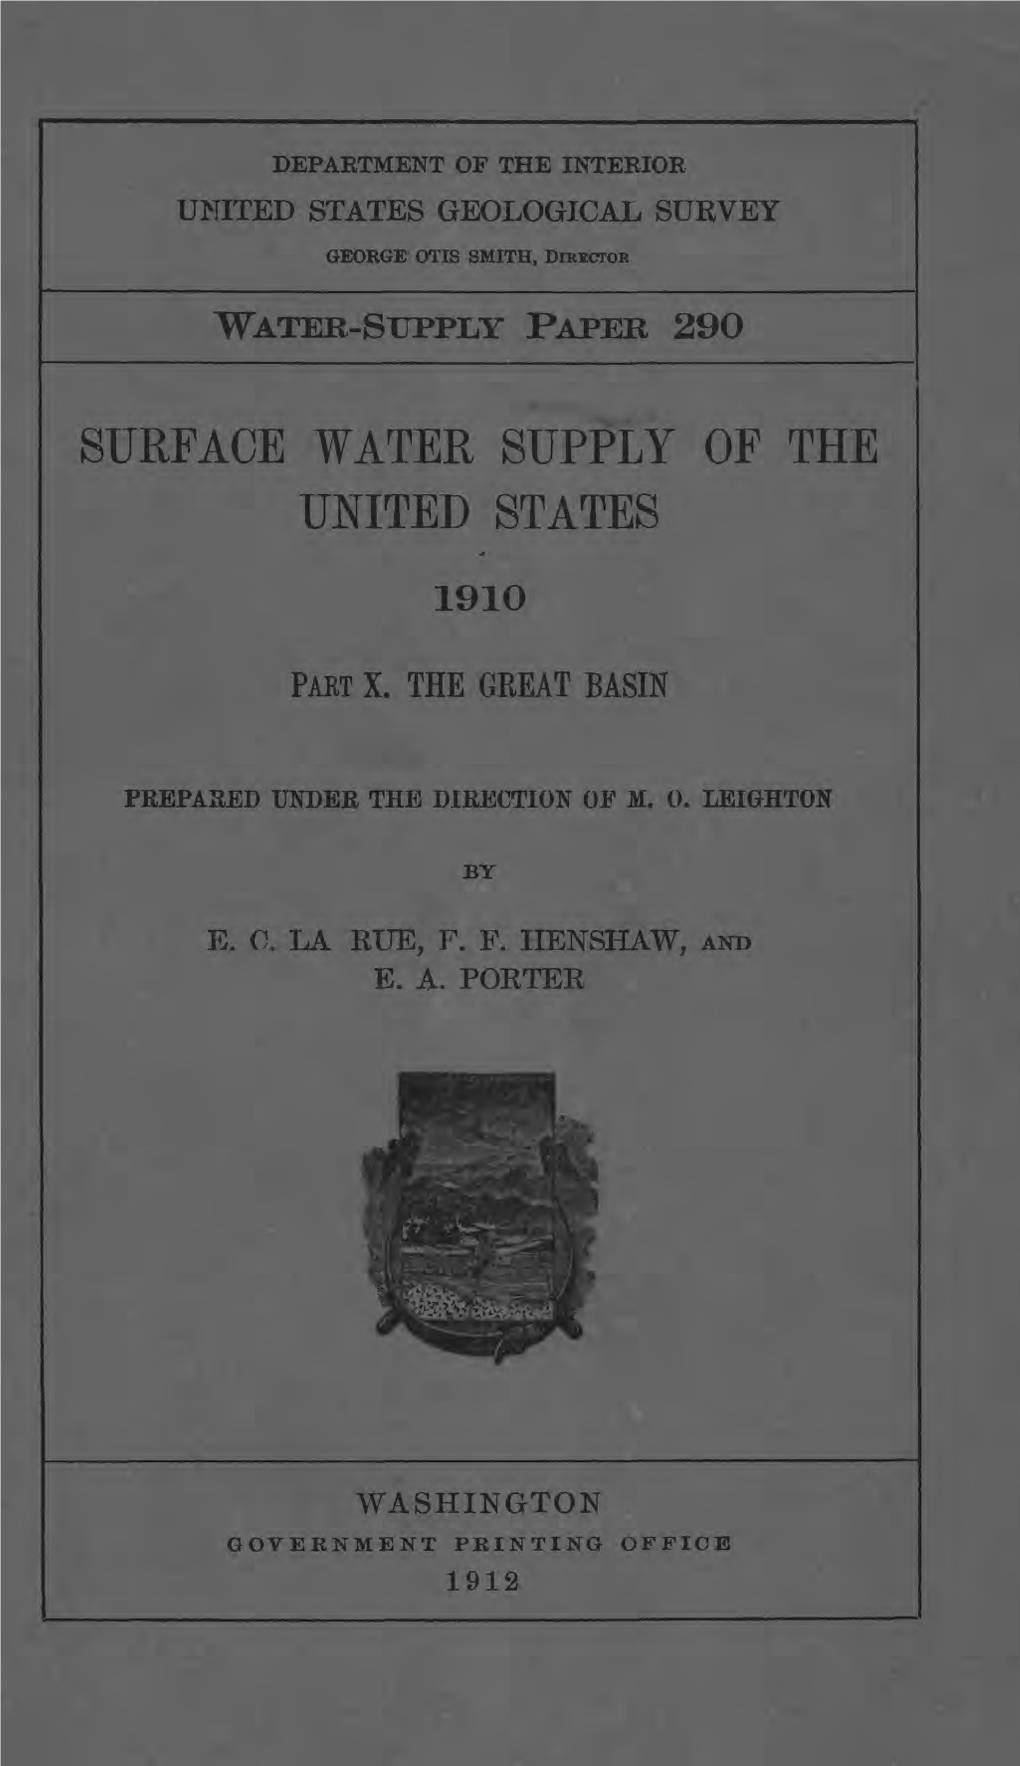 Surface Water Supply Op the United States